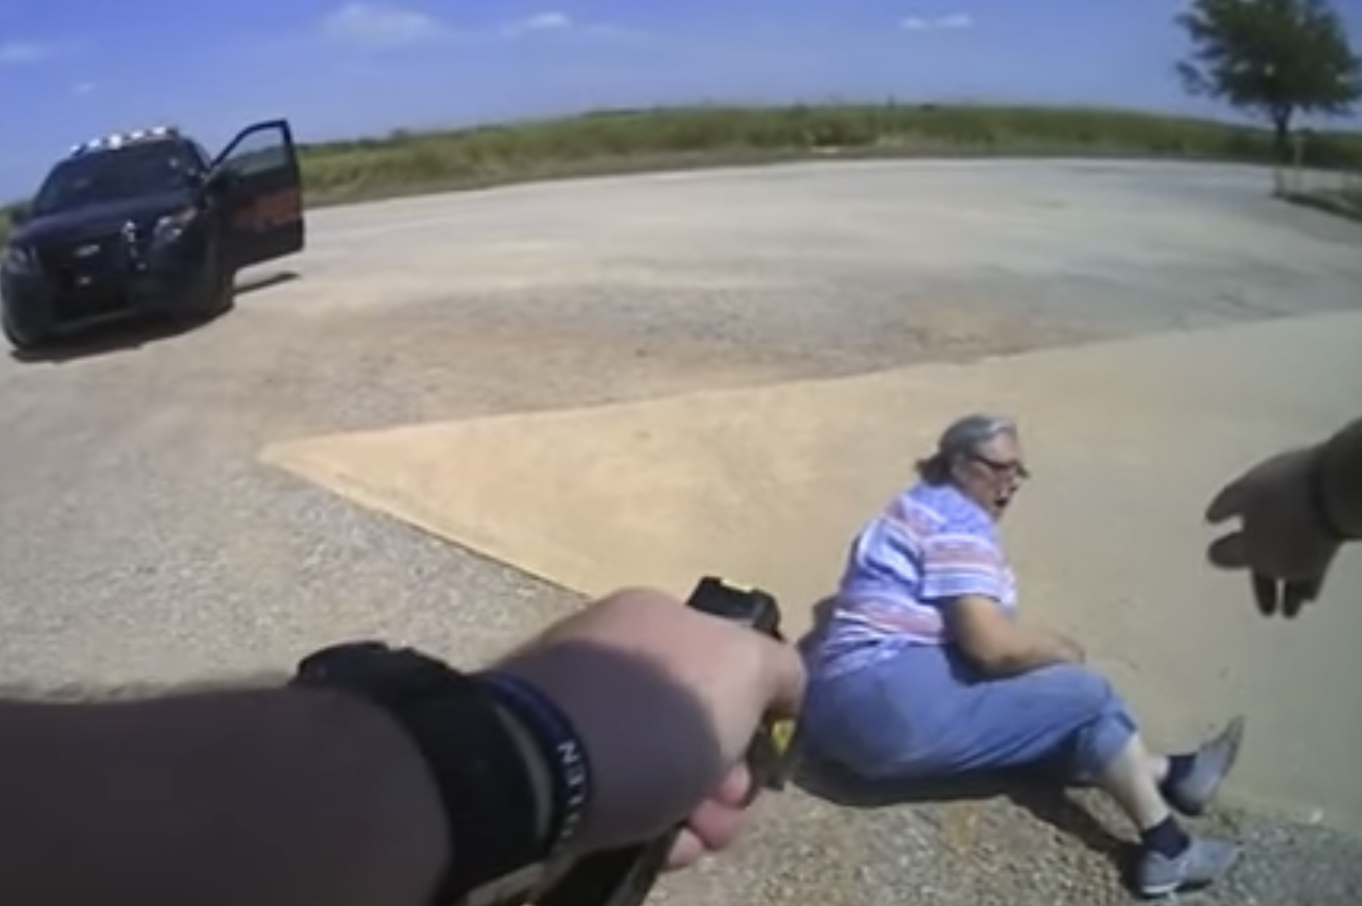 Video shows officer using stun gun on 65-year-old woman